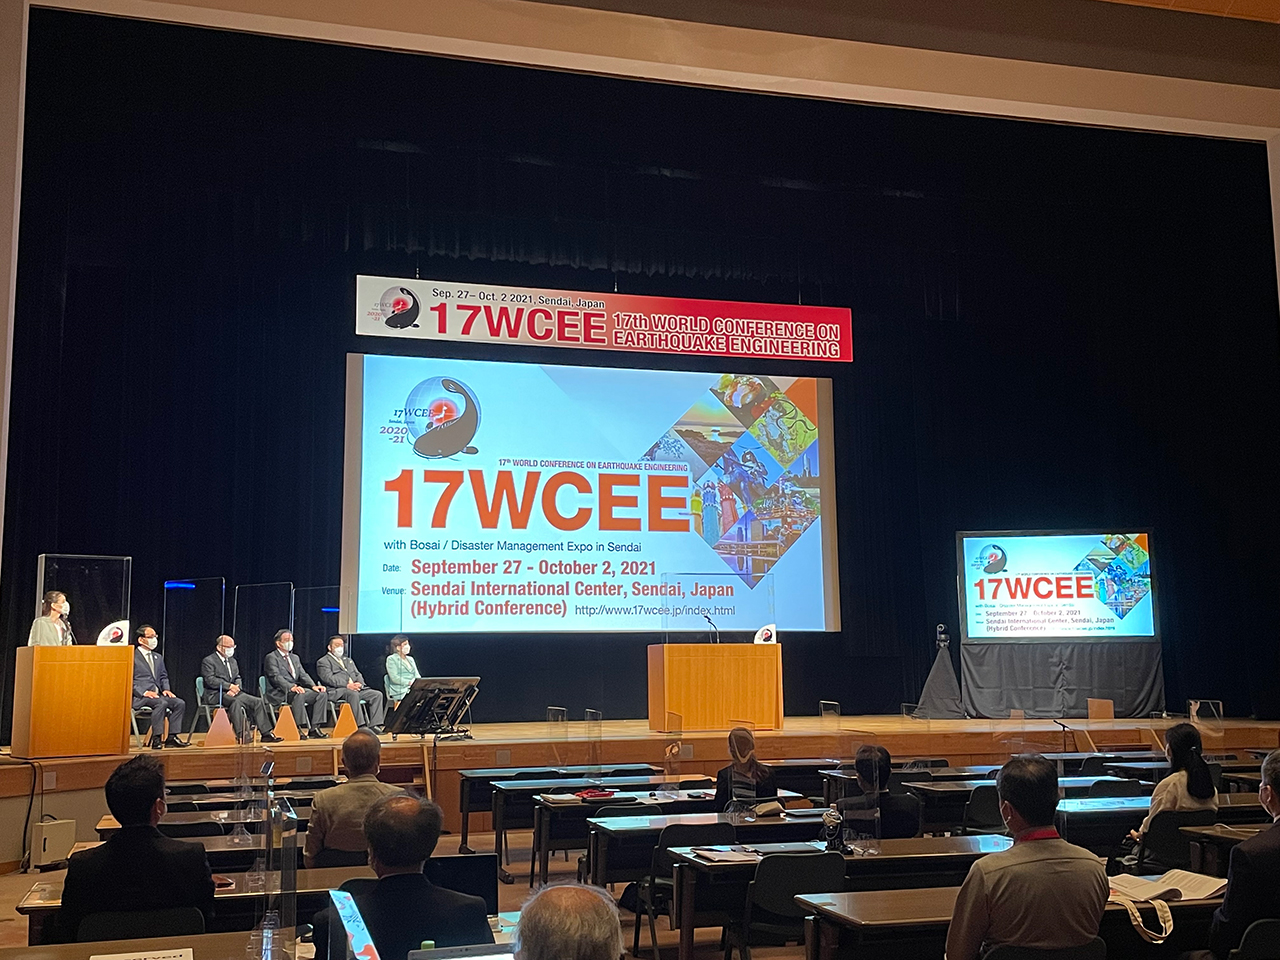 17WCEE: The highlights